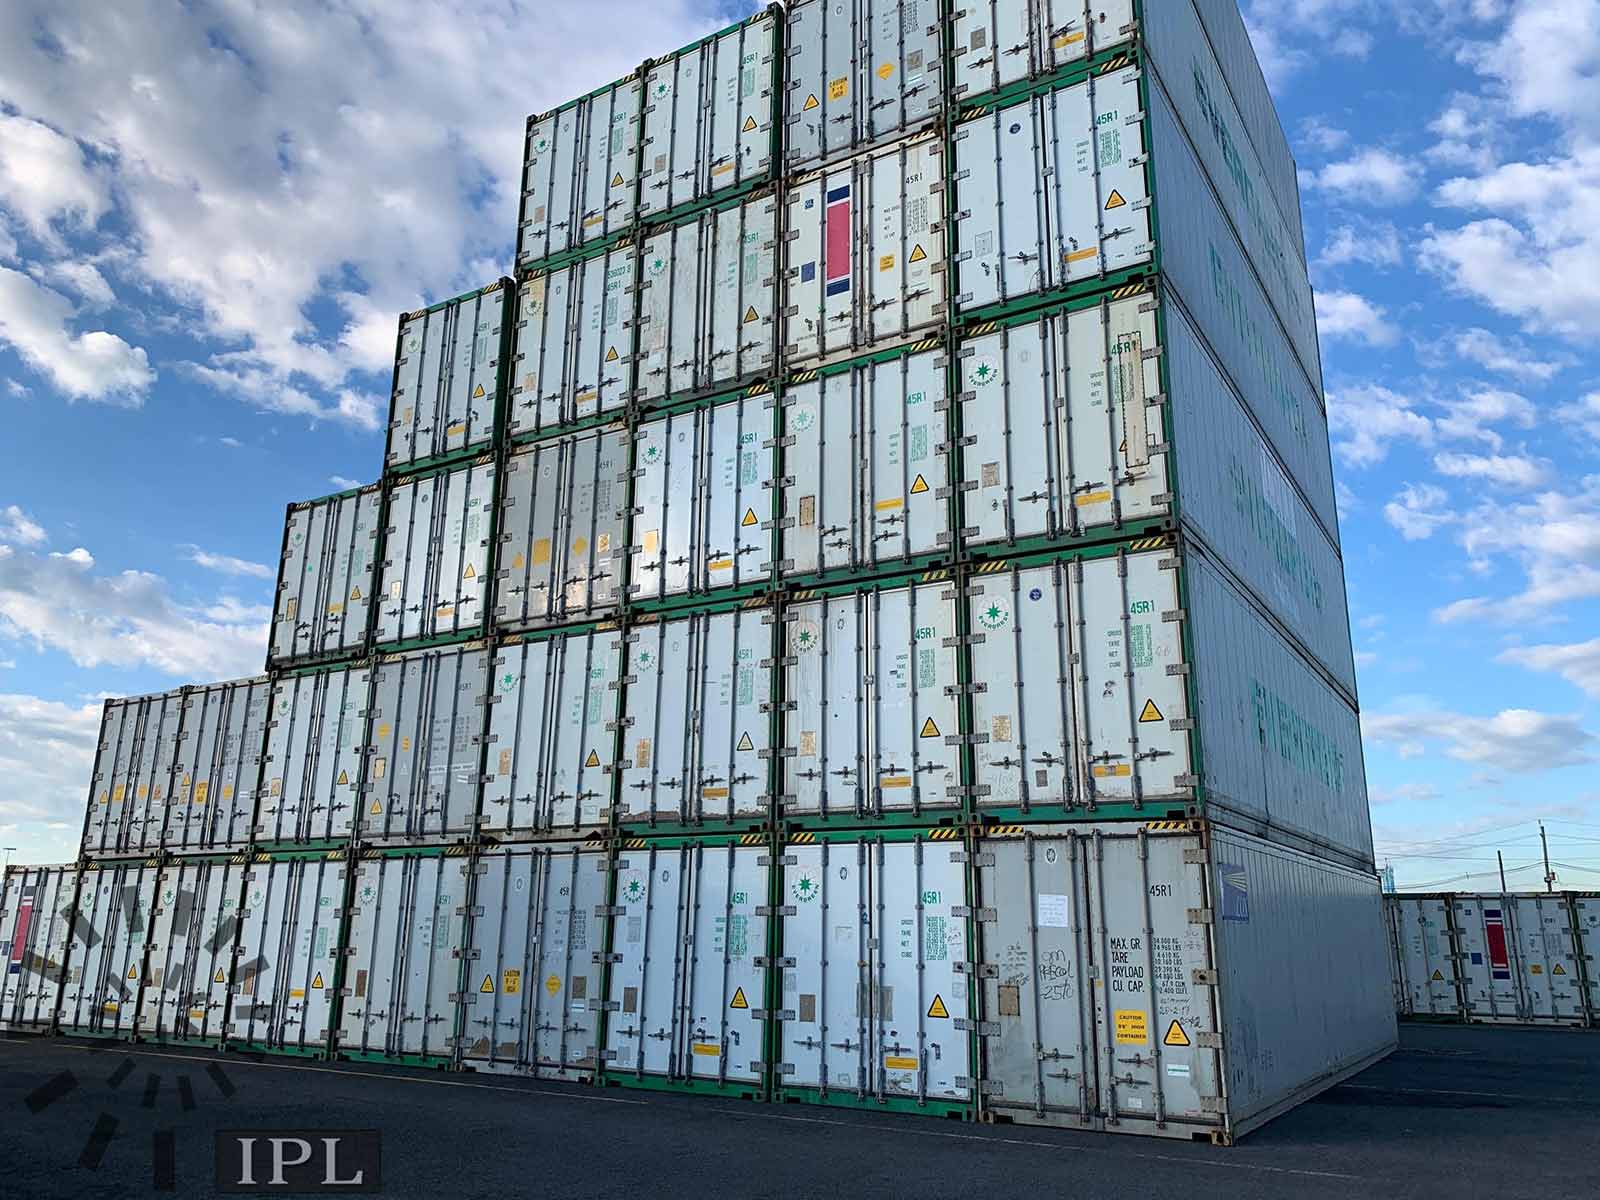 Refrigerated shipping containers